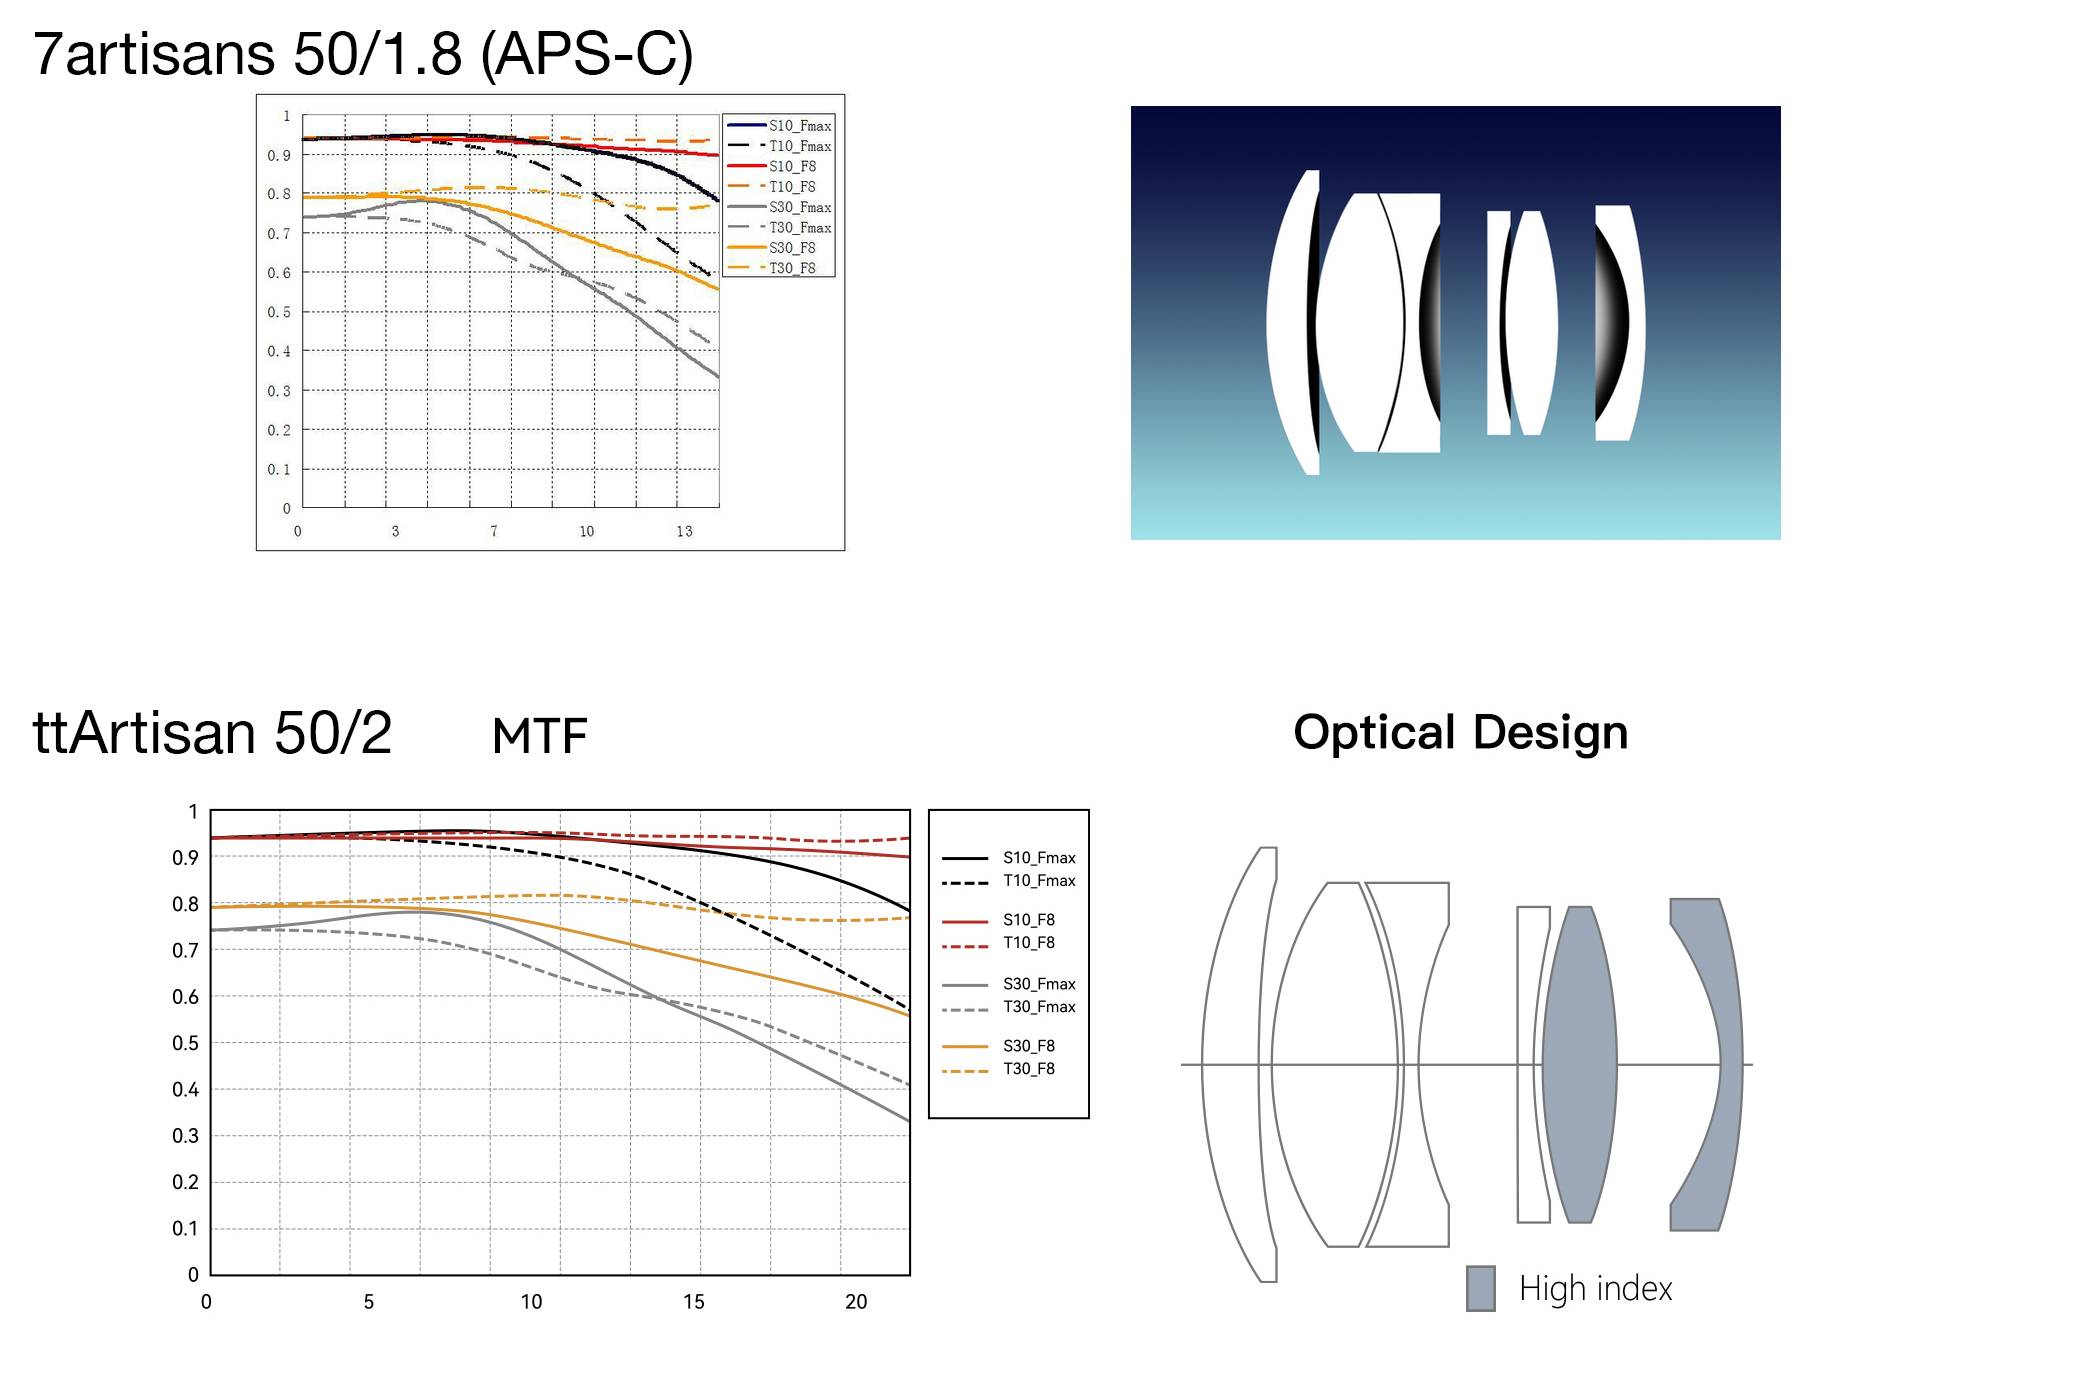 Comparison of optical diagrams and MTF graphs of 7artisans 50/1.8 and TTArtisan 50/2 lenses. The MTF graphs are completely indistinguishable, but they have different labels along the image height axis, which is a fraud on the part of the manufacturer!